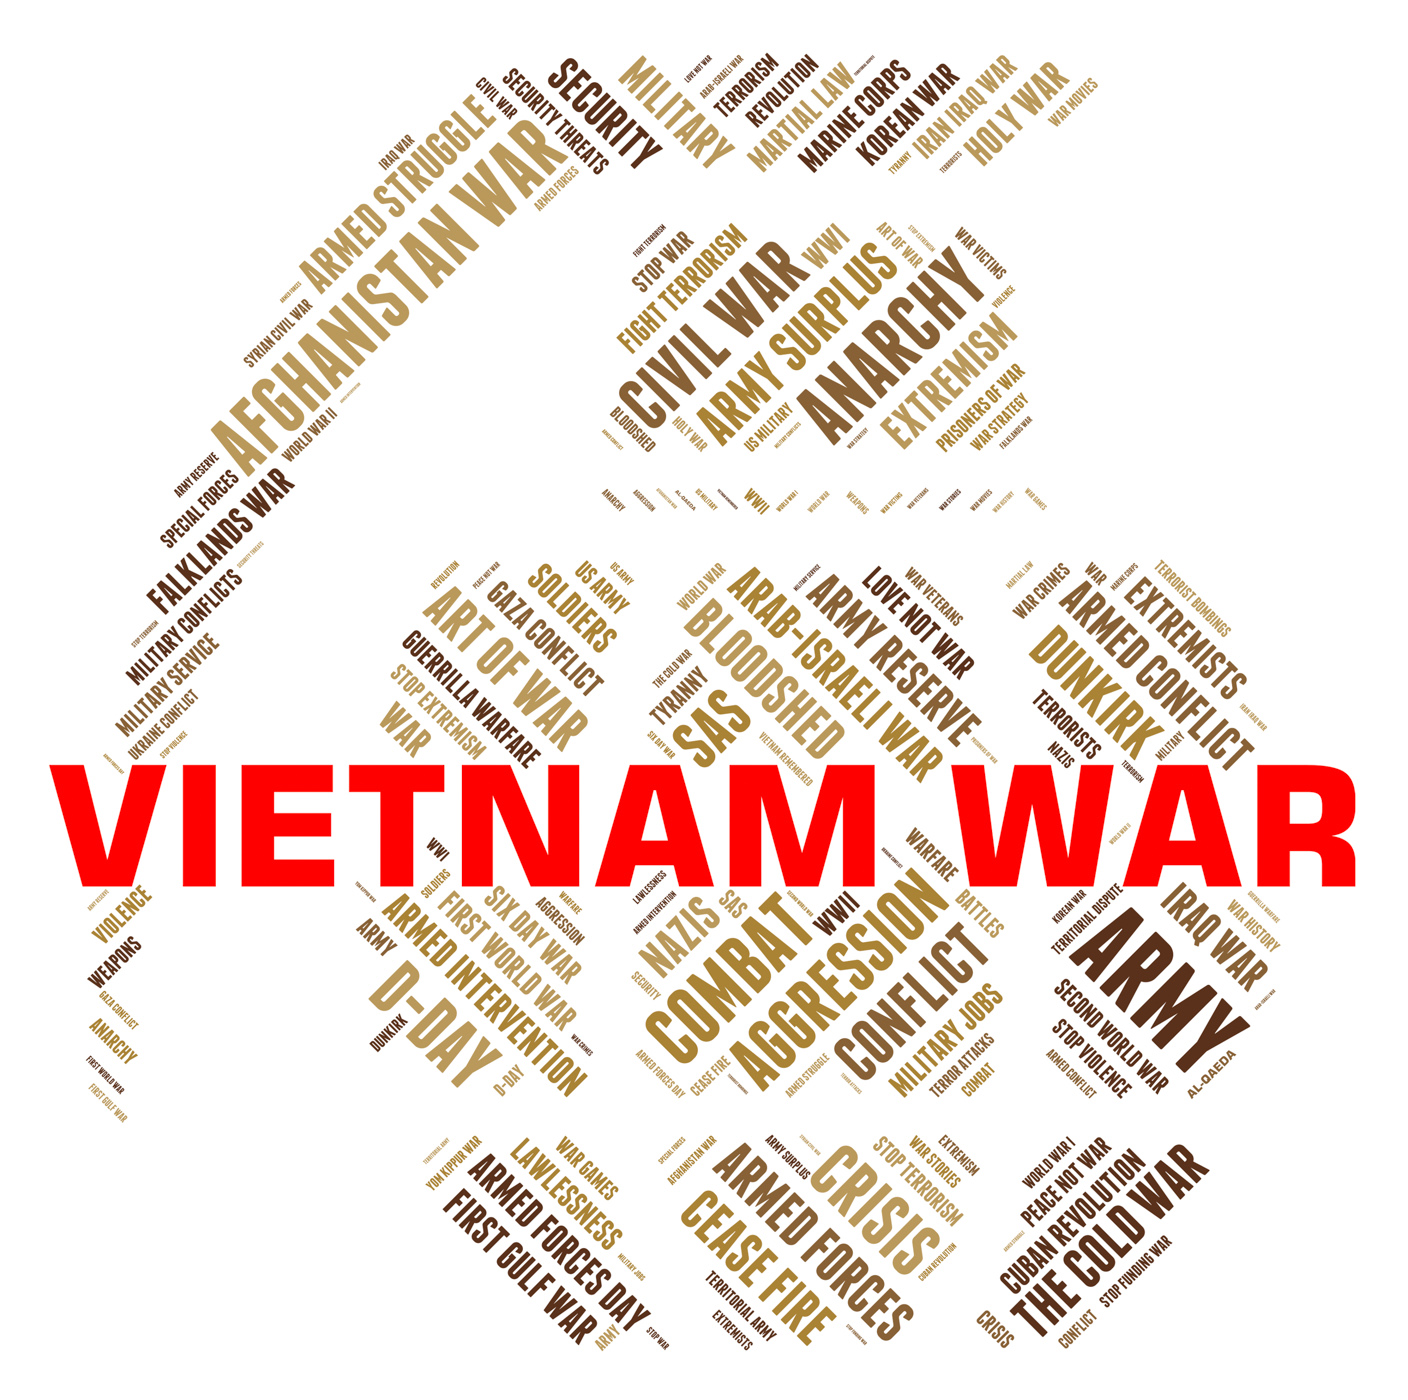 Vietnam war means north vietnamese army and america photo